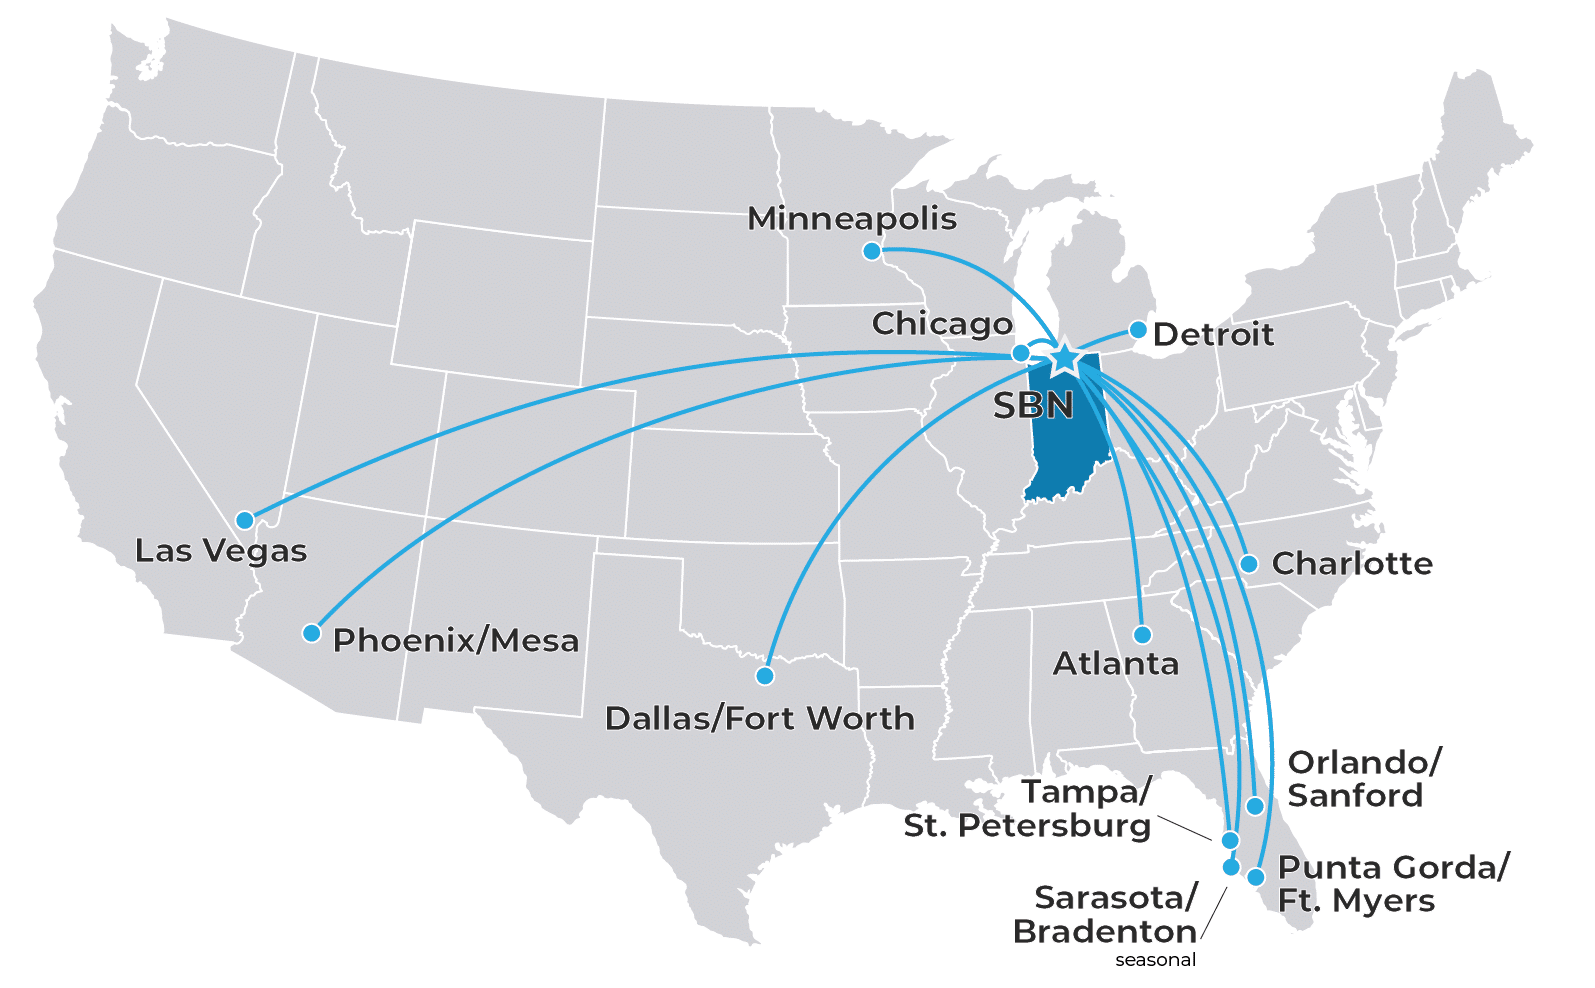 Route map showing nonstop flights to cities in the U.S. from South Bend